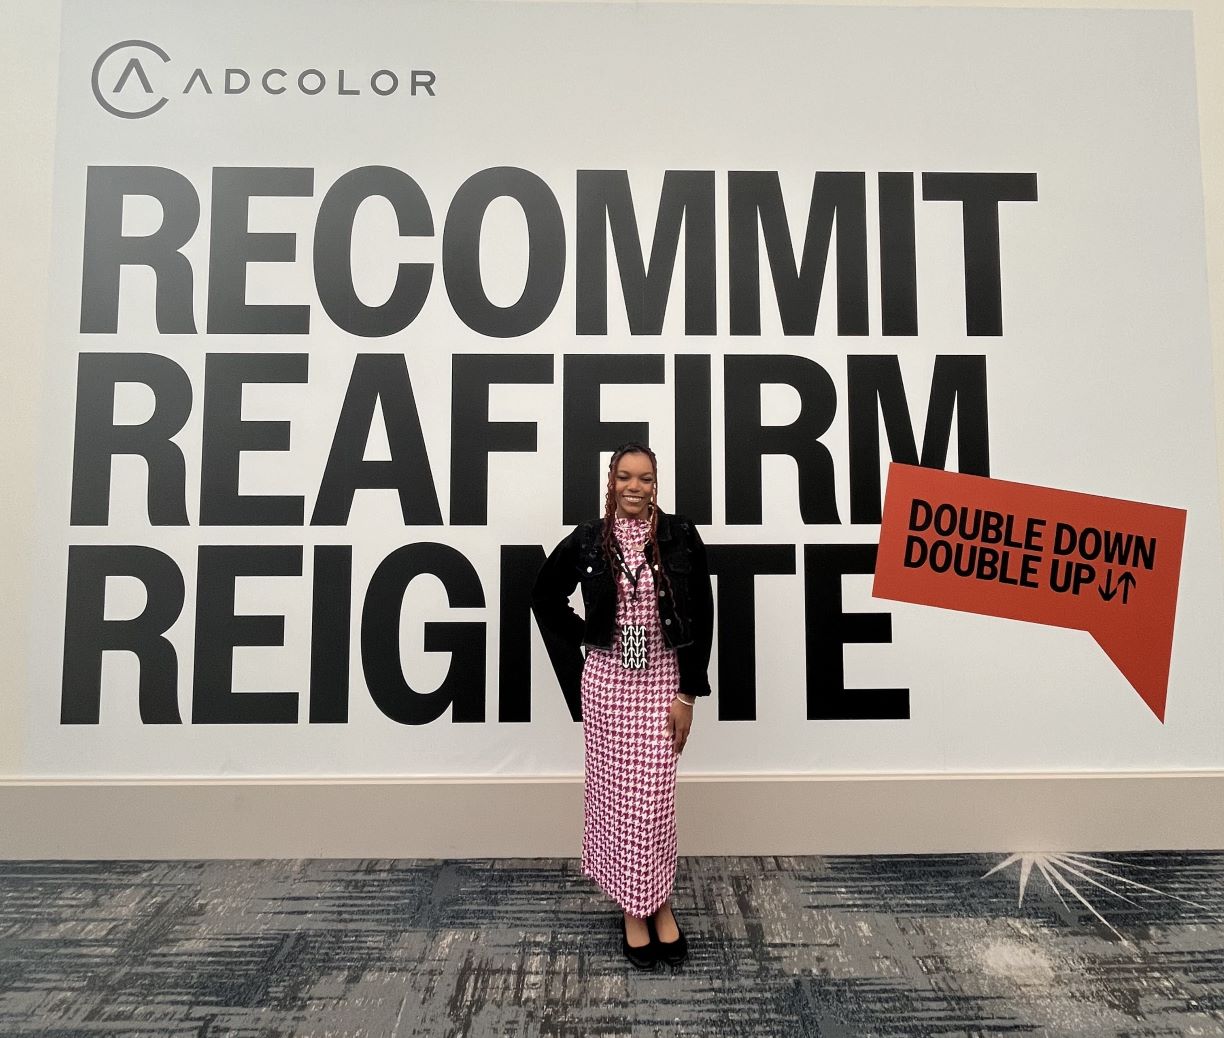 Bentley student Jaychele Nicole Schenck ’26 poses in front of a backdrop at the ADCOLOR 2023 conference